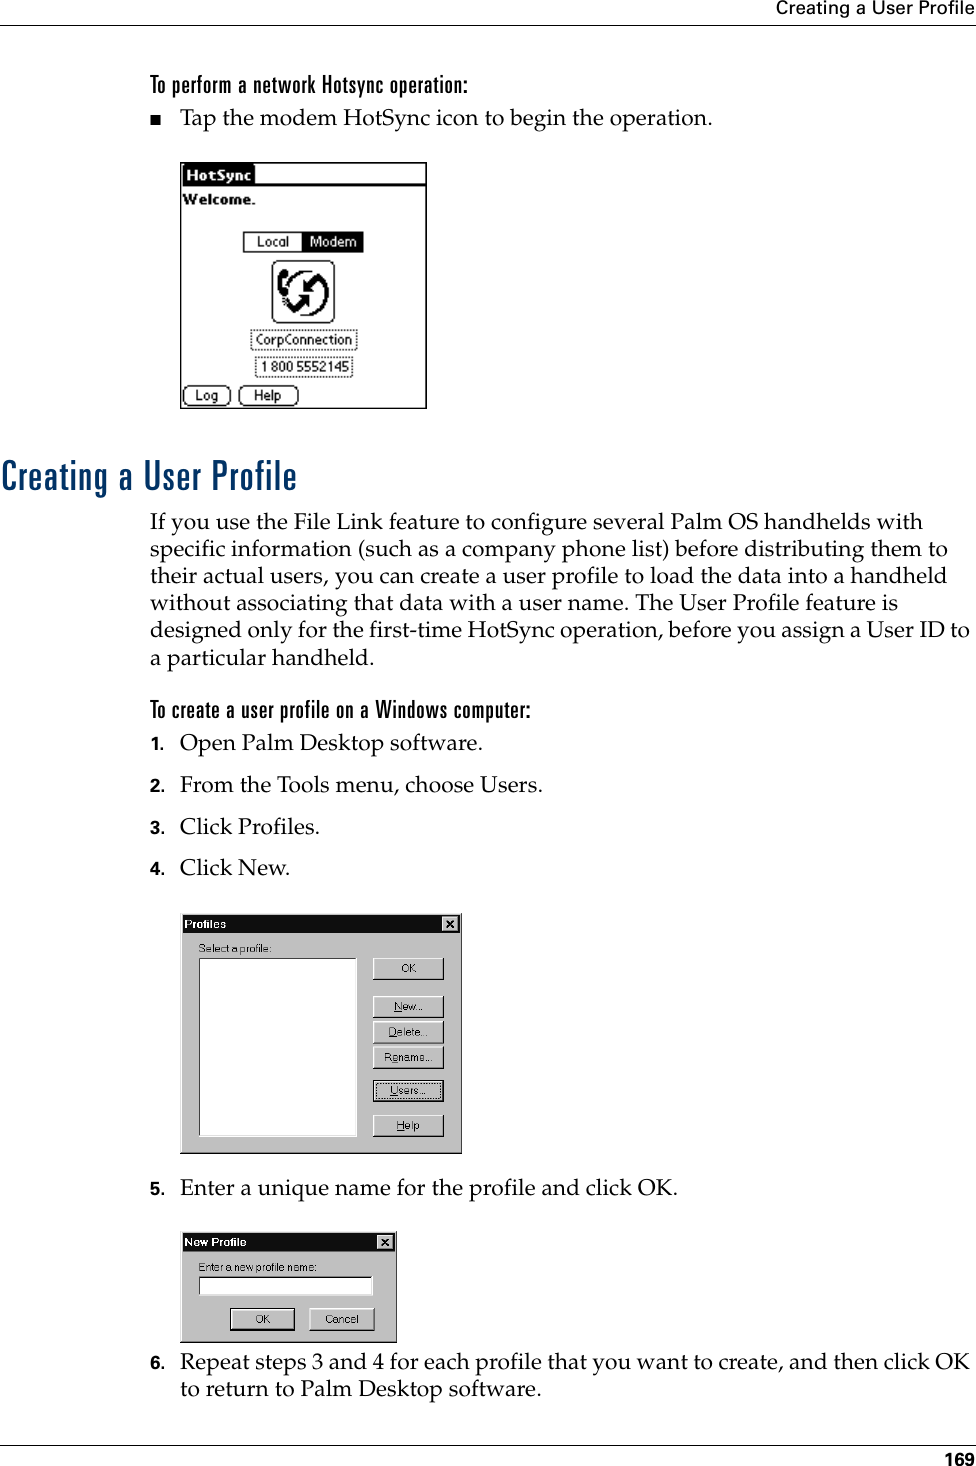 Creating a User Profile169To perform a network Hotsync operation:■Tap the modem HotSync icon to begin the operation.Creating a User ProfileIf you use the File Link feature to configure several Palm OS handhelds with specific information (such as a company phone list) before distributing them to their actual users, you can create a user profile to load the data into a handheld without associating that data with a user name. The User Profile feature is designed only for the first-time HotSync operation, before you assign a User ID to a particular handheld. To create a user profile on a Windows computer:1. Open Palm Desktop software.2. From the Tools menu, choose Users.3. Click Profiles. 4. Click New.5. Enter a unique name for the profile and click OK. 6. Repeat steps 3 and 4 for each profile that you want to create, and then click OK to return to Palm Desktop software. 